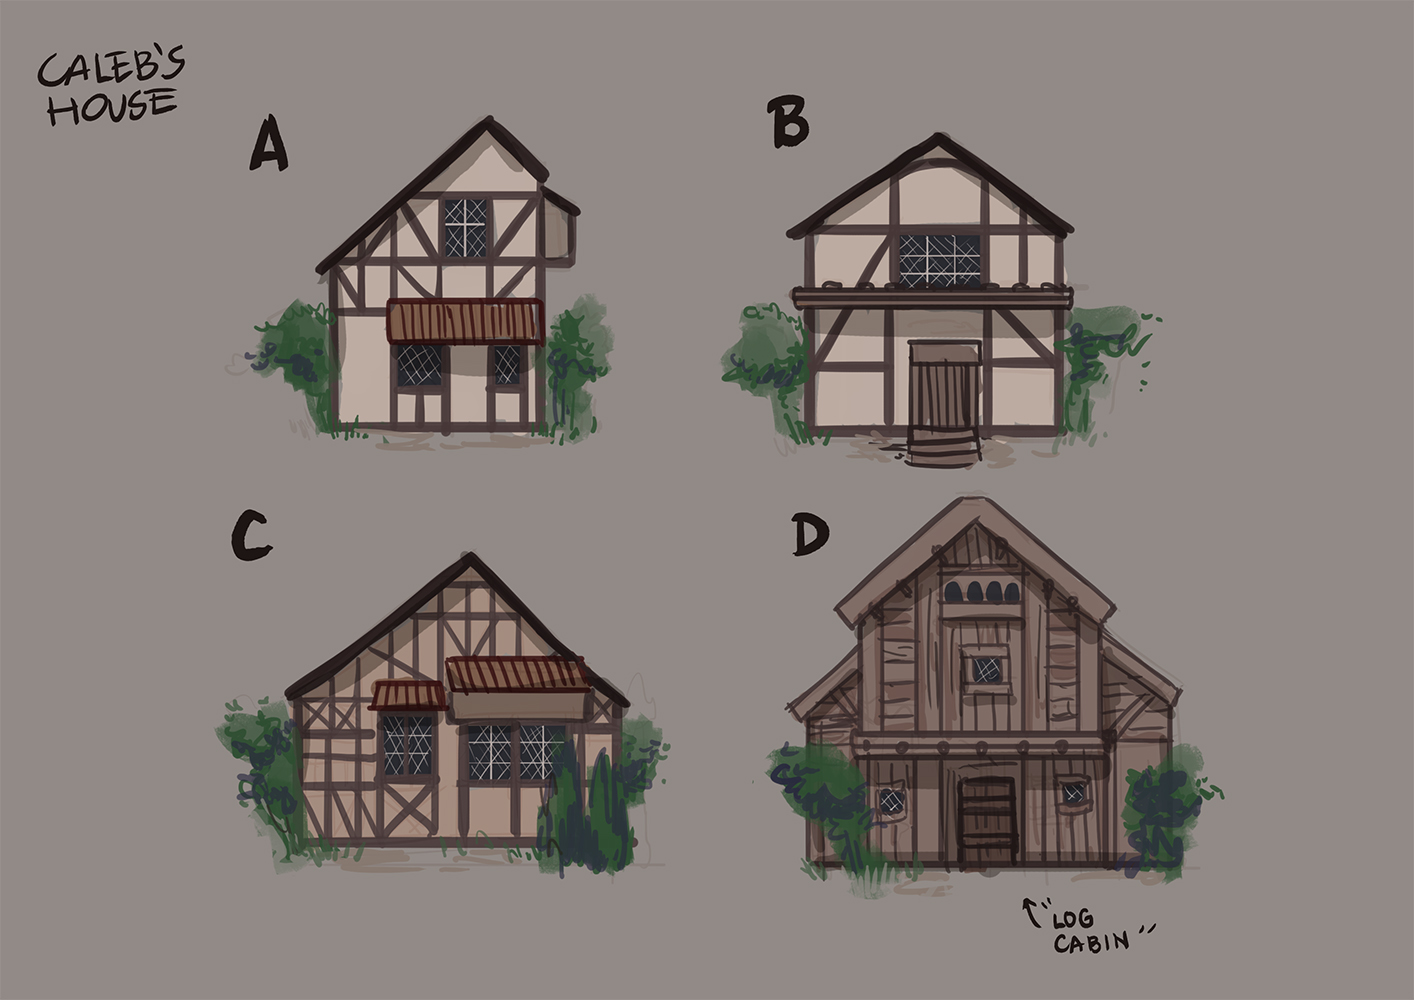 Caleb’s house concepts